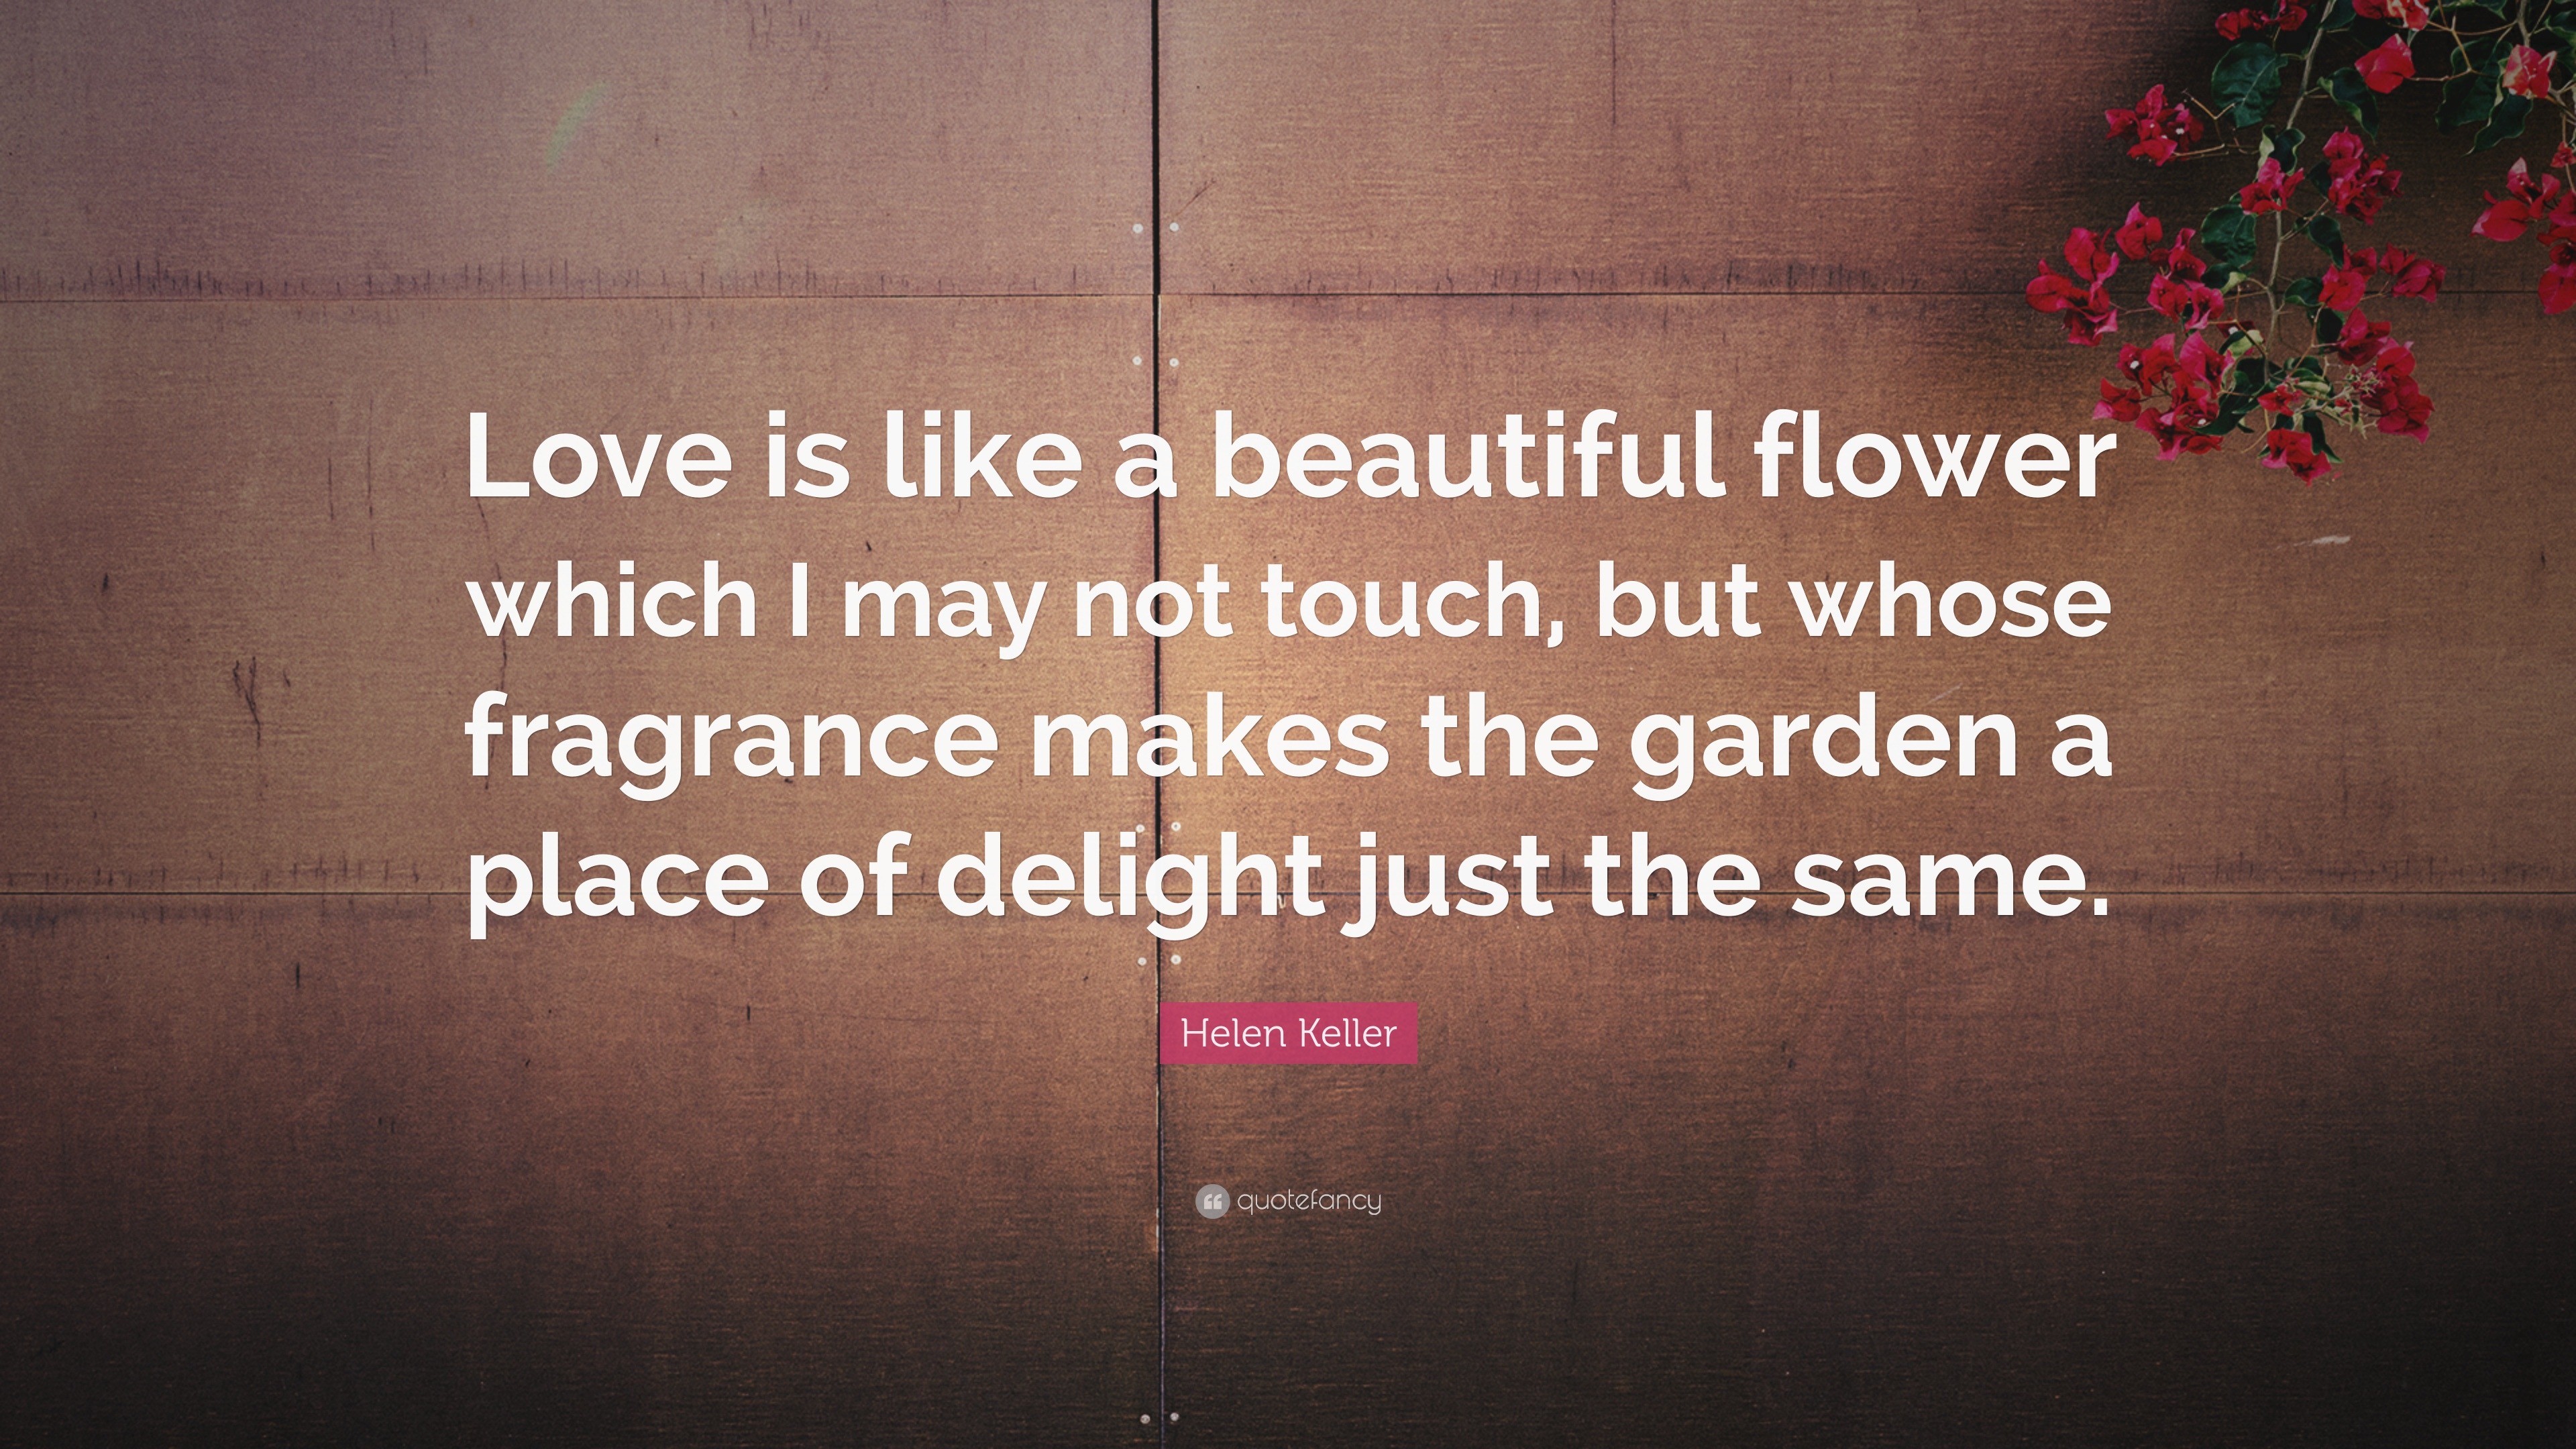 Helen Keller Quote “Love is like a beautiful flower which I may not touch